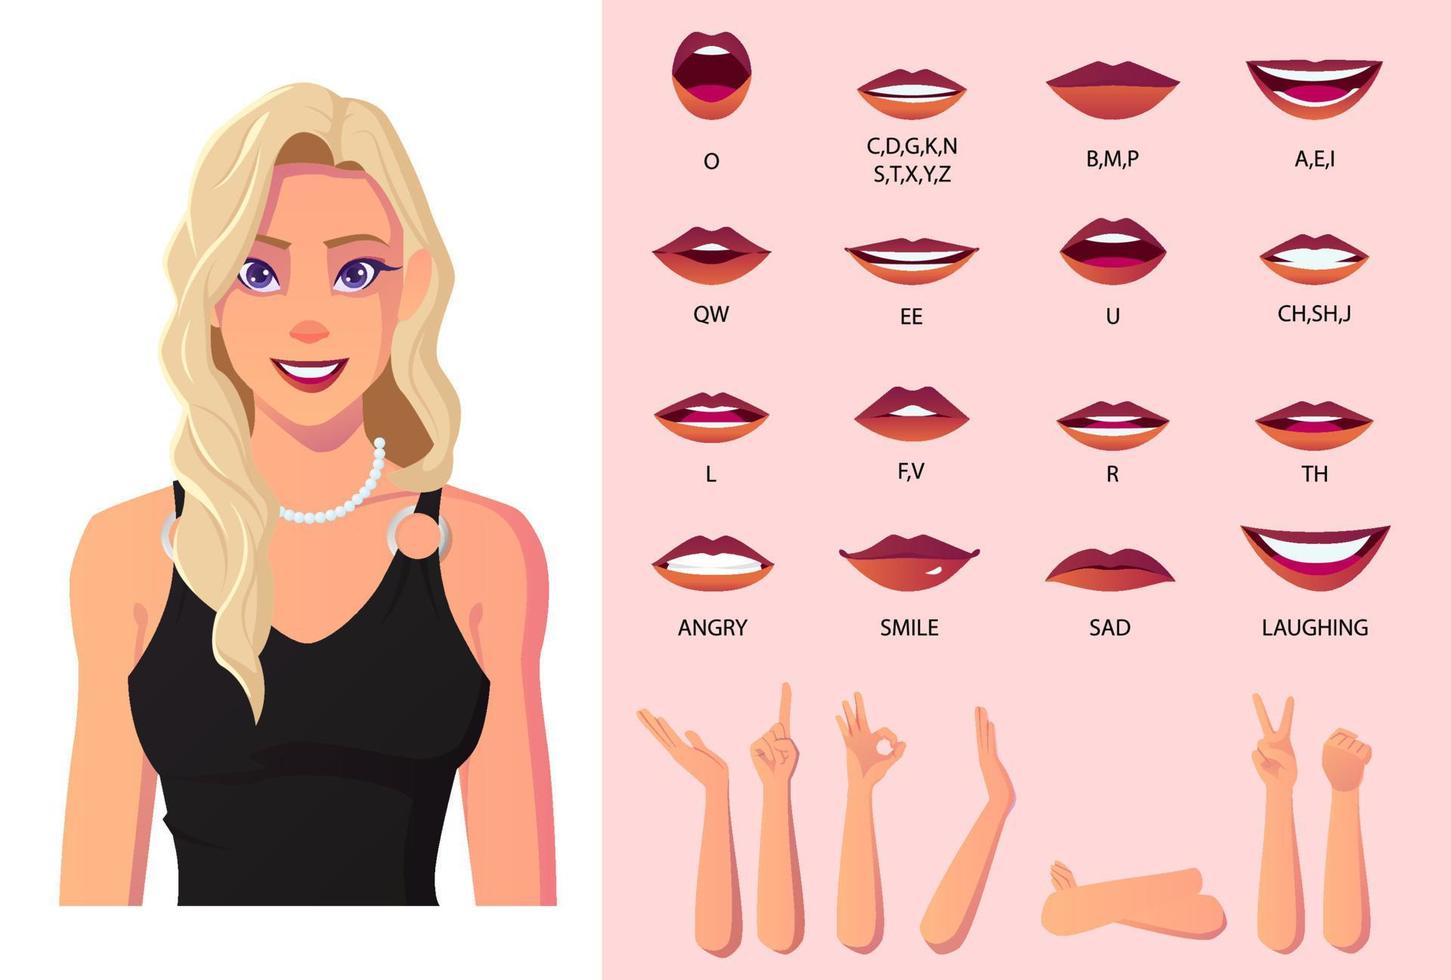 Blonde Woman Character Mouth Animation And Lip Syncing, Beautiful Woman Wearing Black Dress Premium Vector